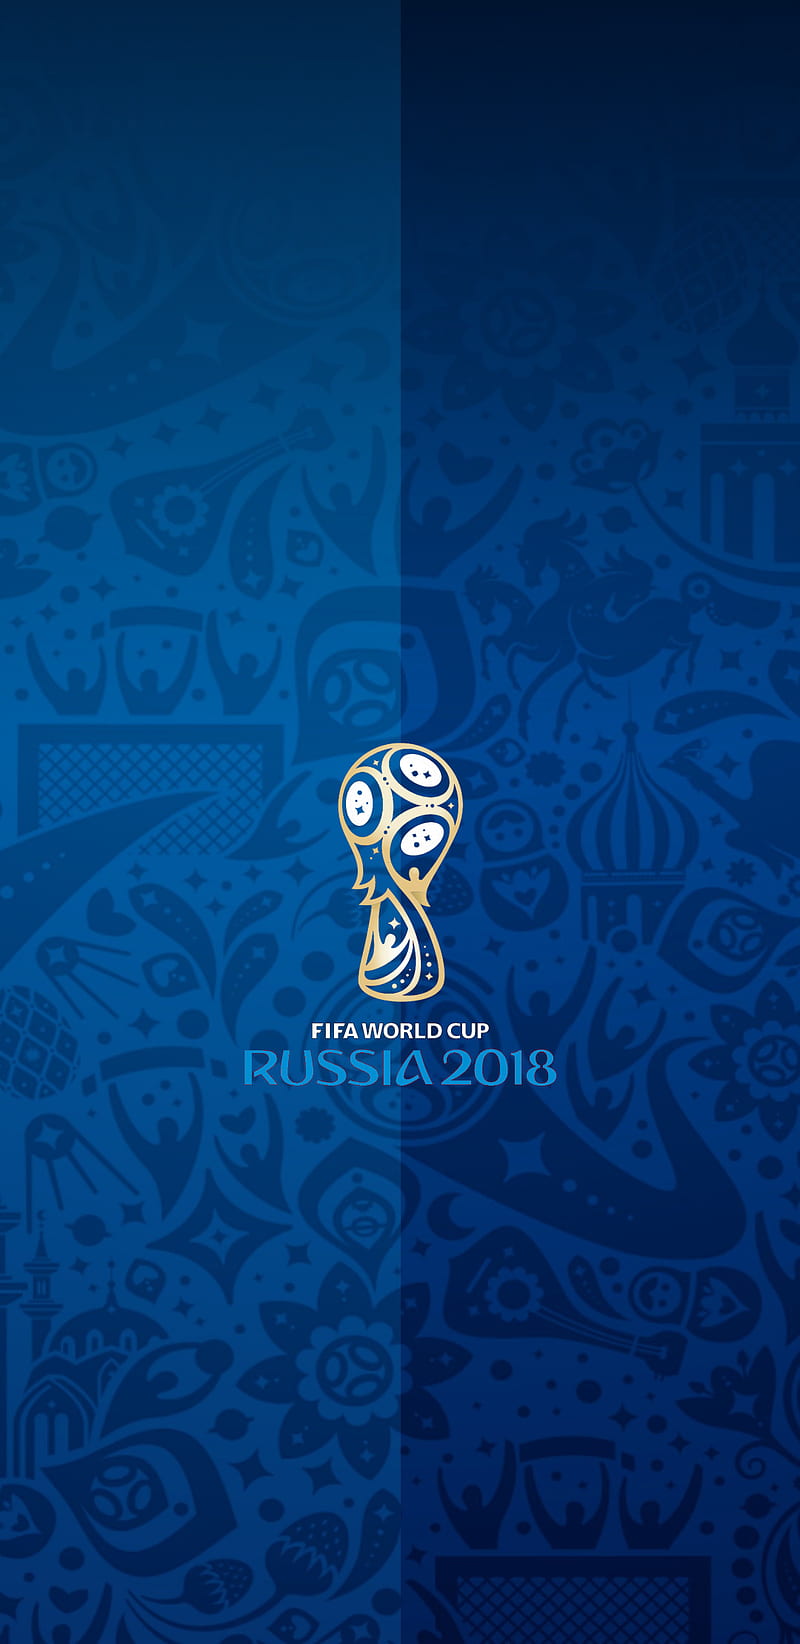 world cup, 2018, blue, football, russia, russia 2018, world cup 2018, HD phone wallpaper